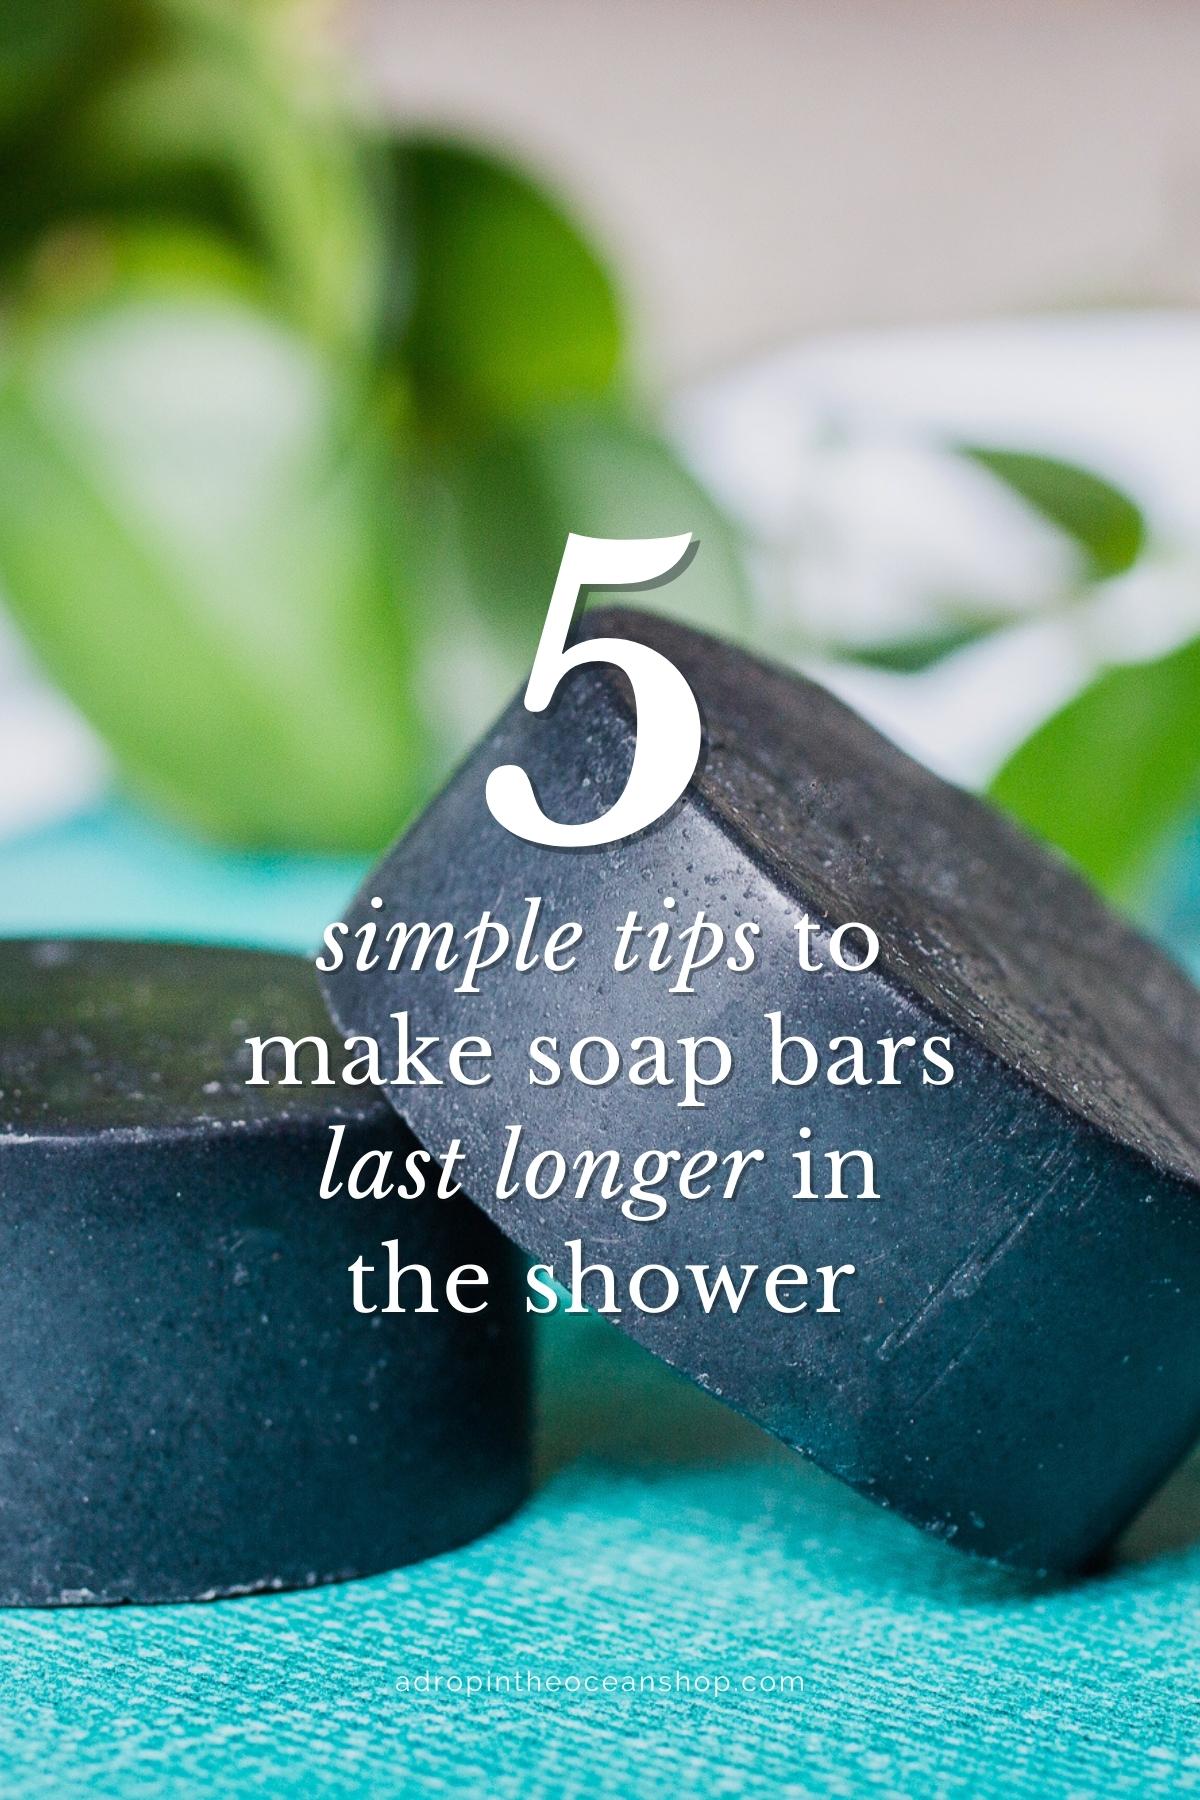 The 5 Best Soap Dishes